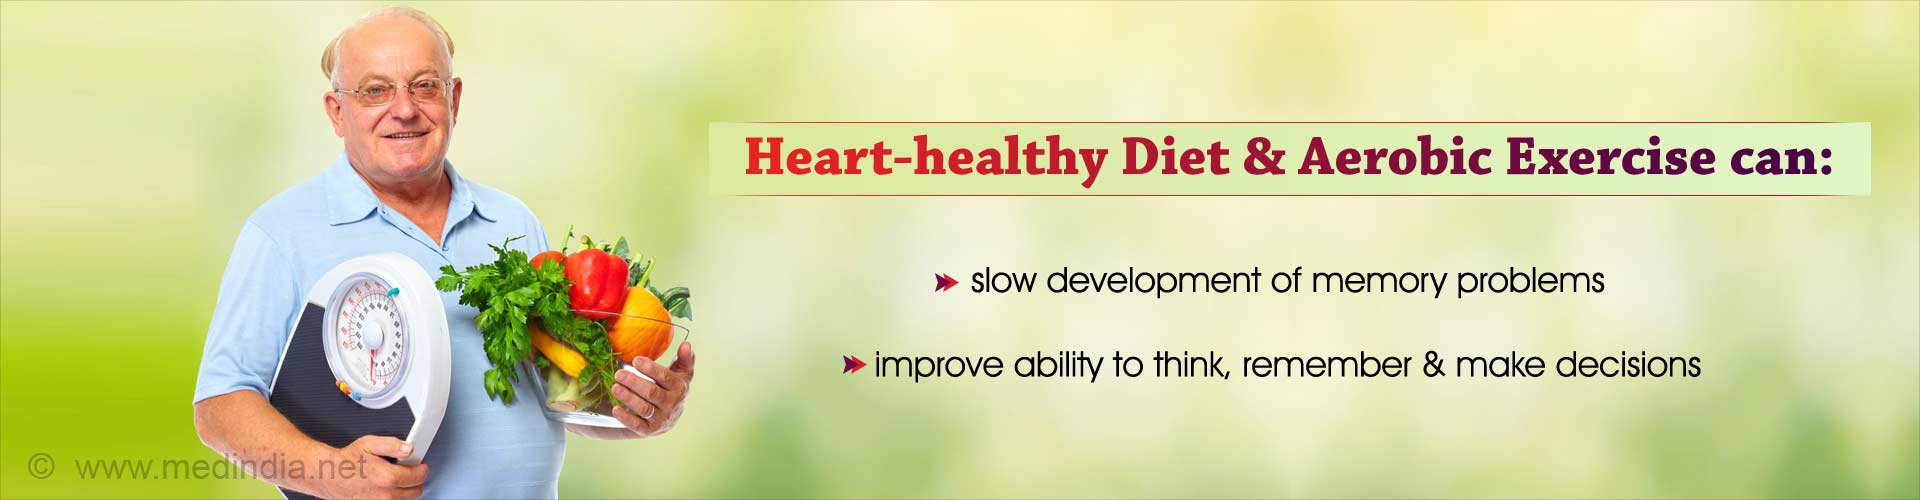 Heart-healthy diet and aerobic exercise can slow development of memory problems, improve ability to think, remember and make decisions.